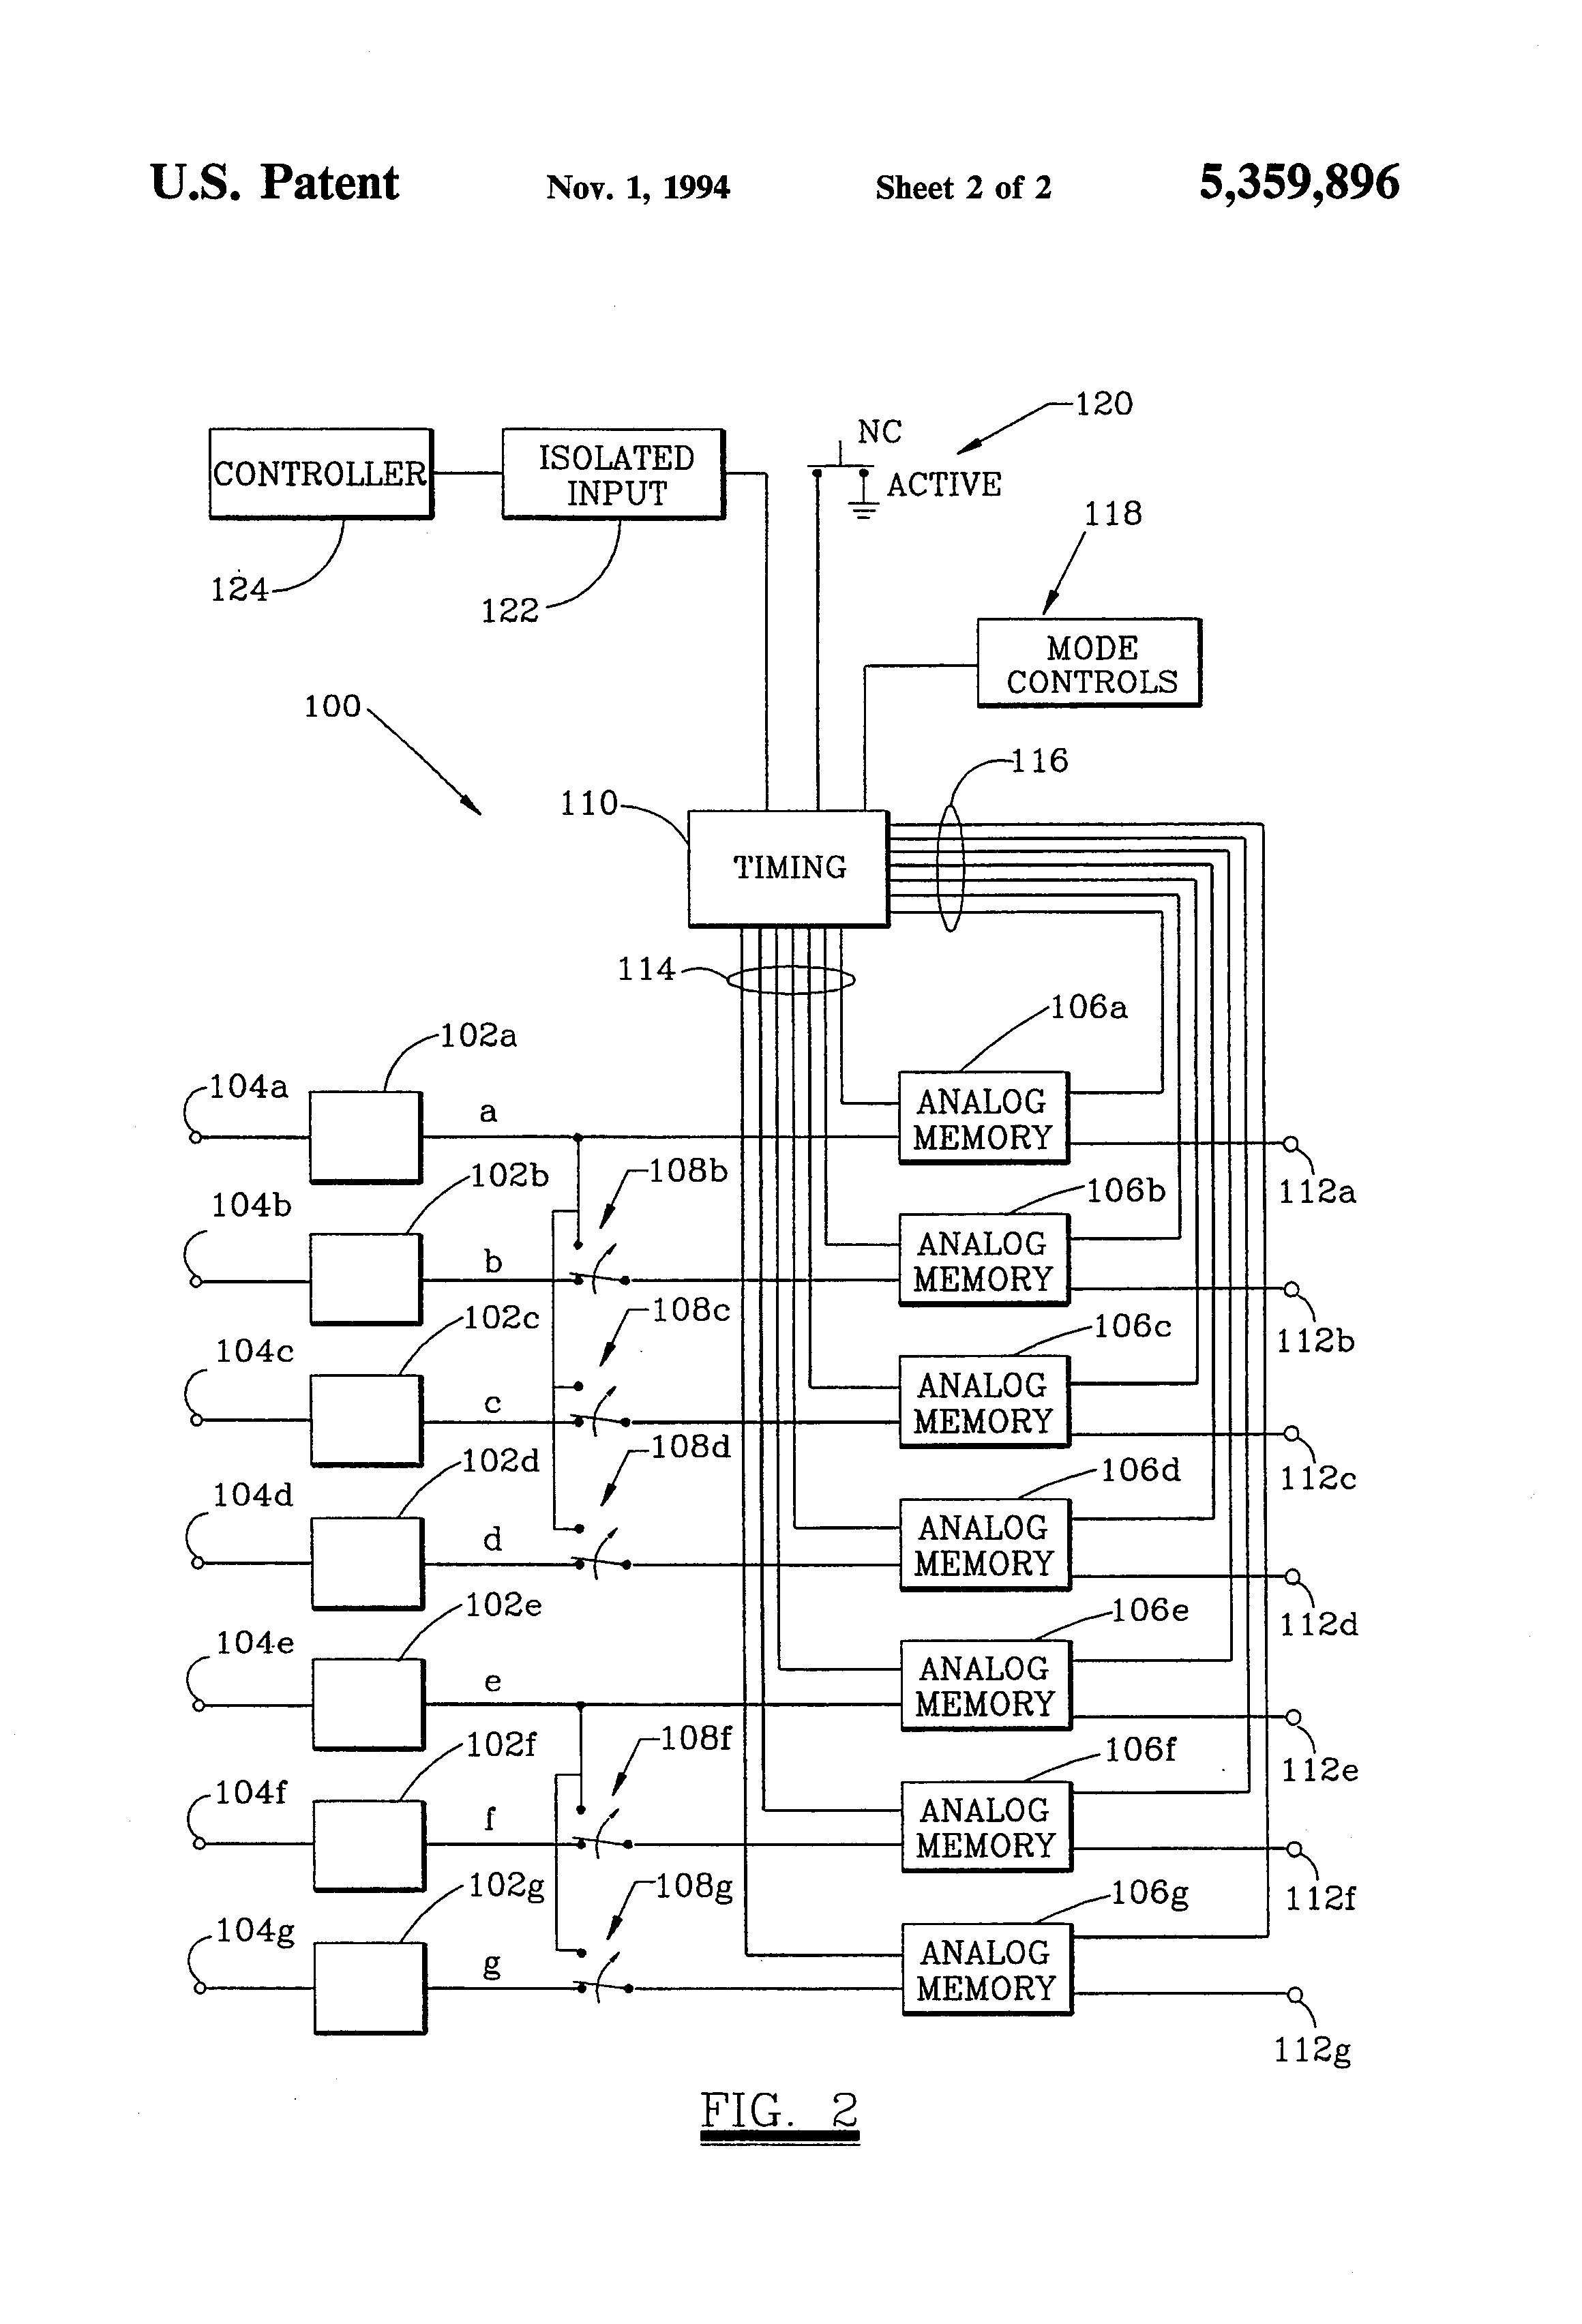 A representation of the Acceleration Recorder and Playback Module. Source: US Patent No: 5,576,491 (2015)